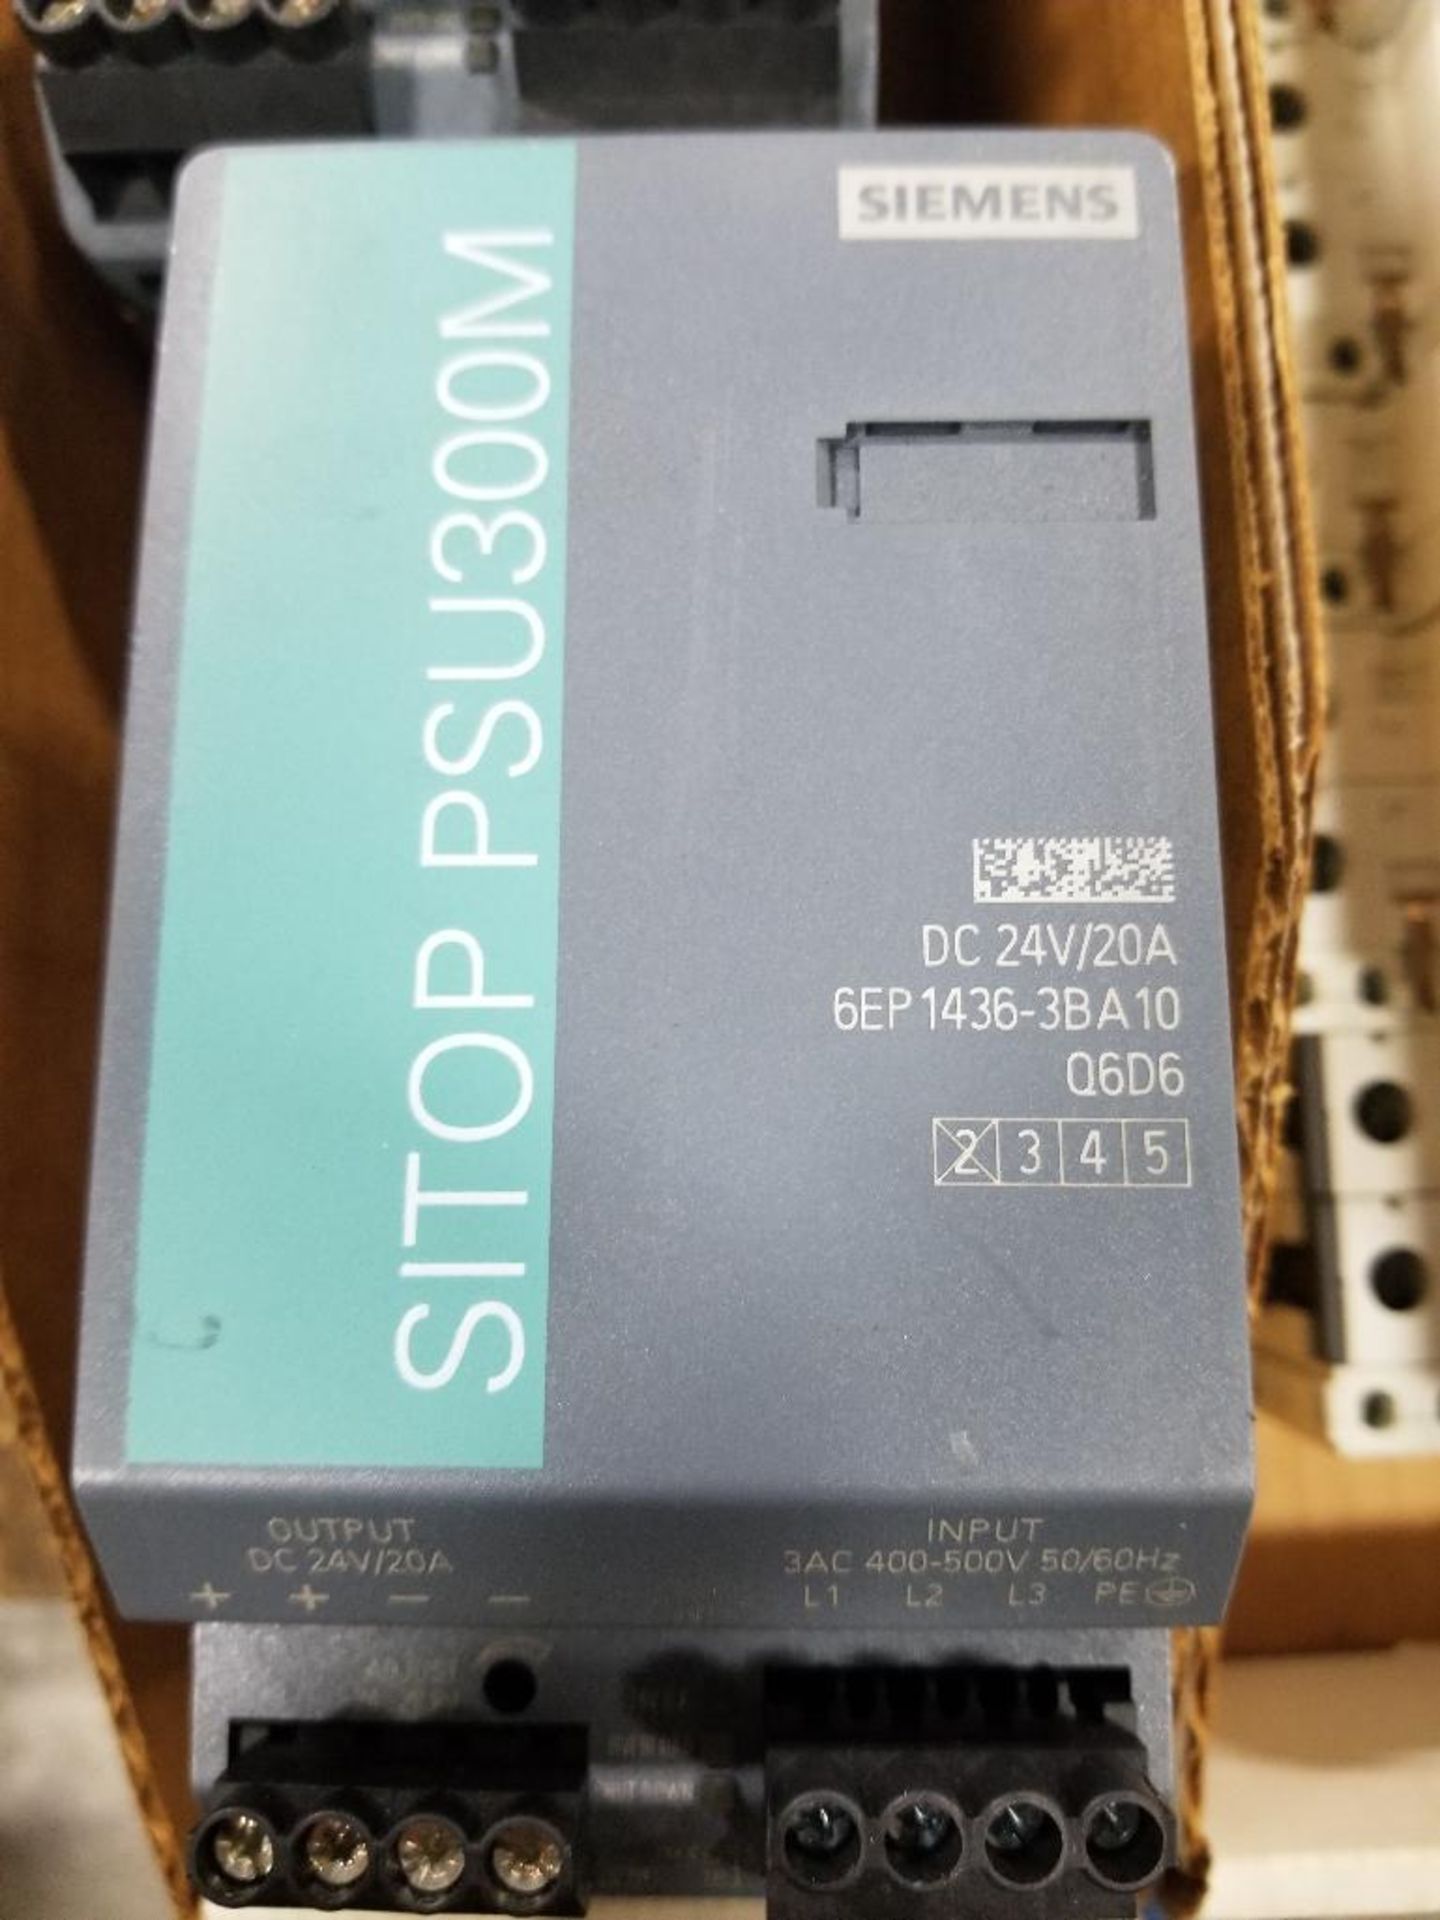 Qty 3 - Siemens Sitop power supply. Part number 6EP1436-3BA10. - Image 4 of 4